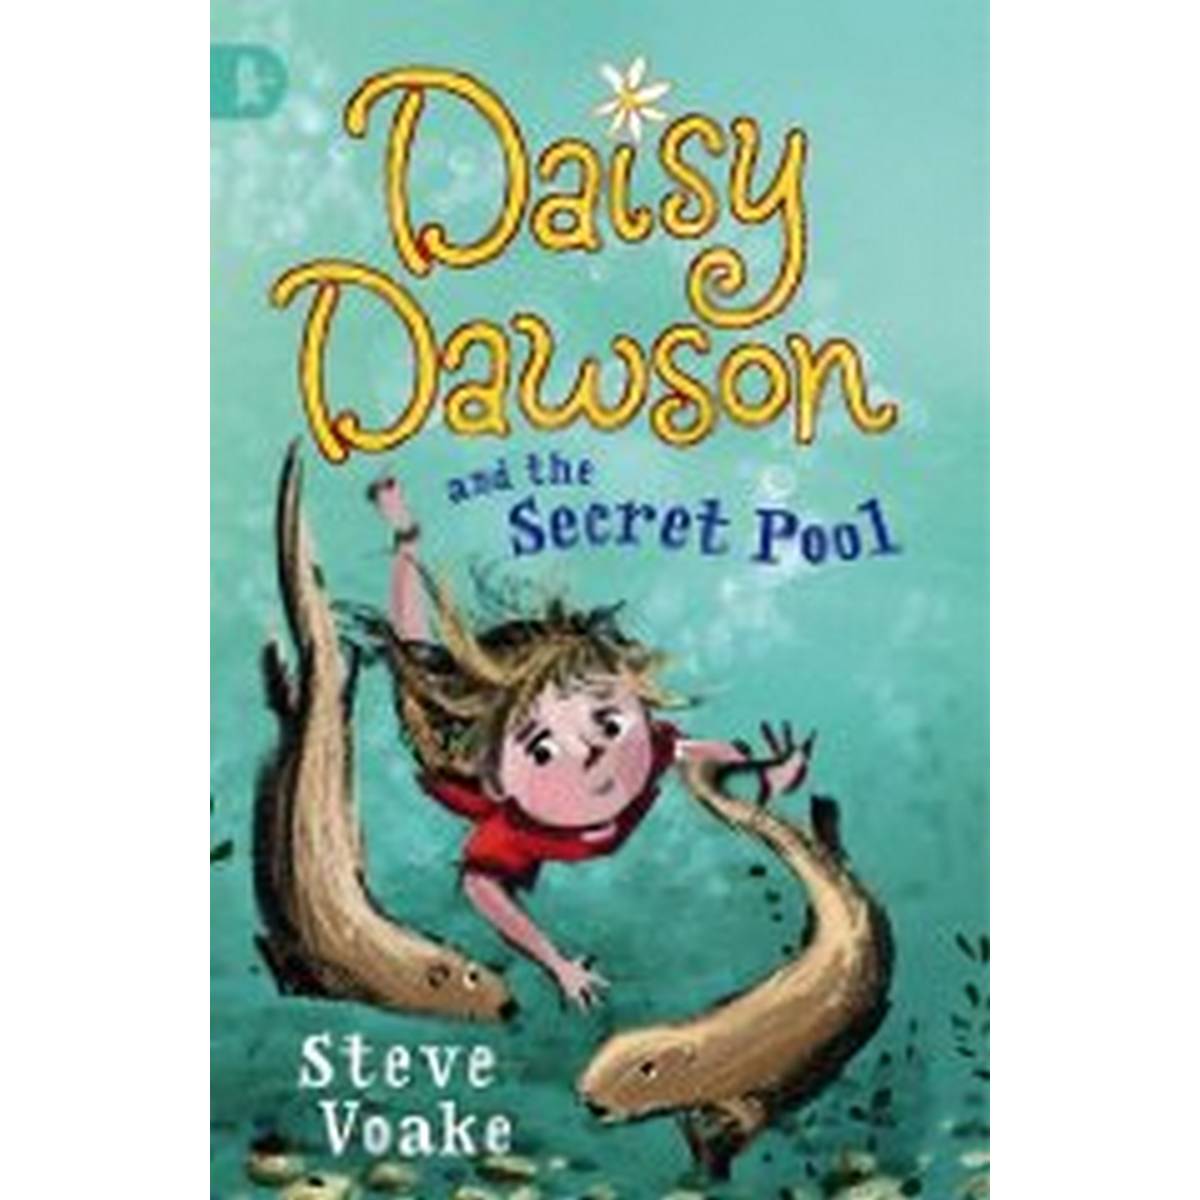 Daisy Dawson and the Secret Pool (Racing Reads)